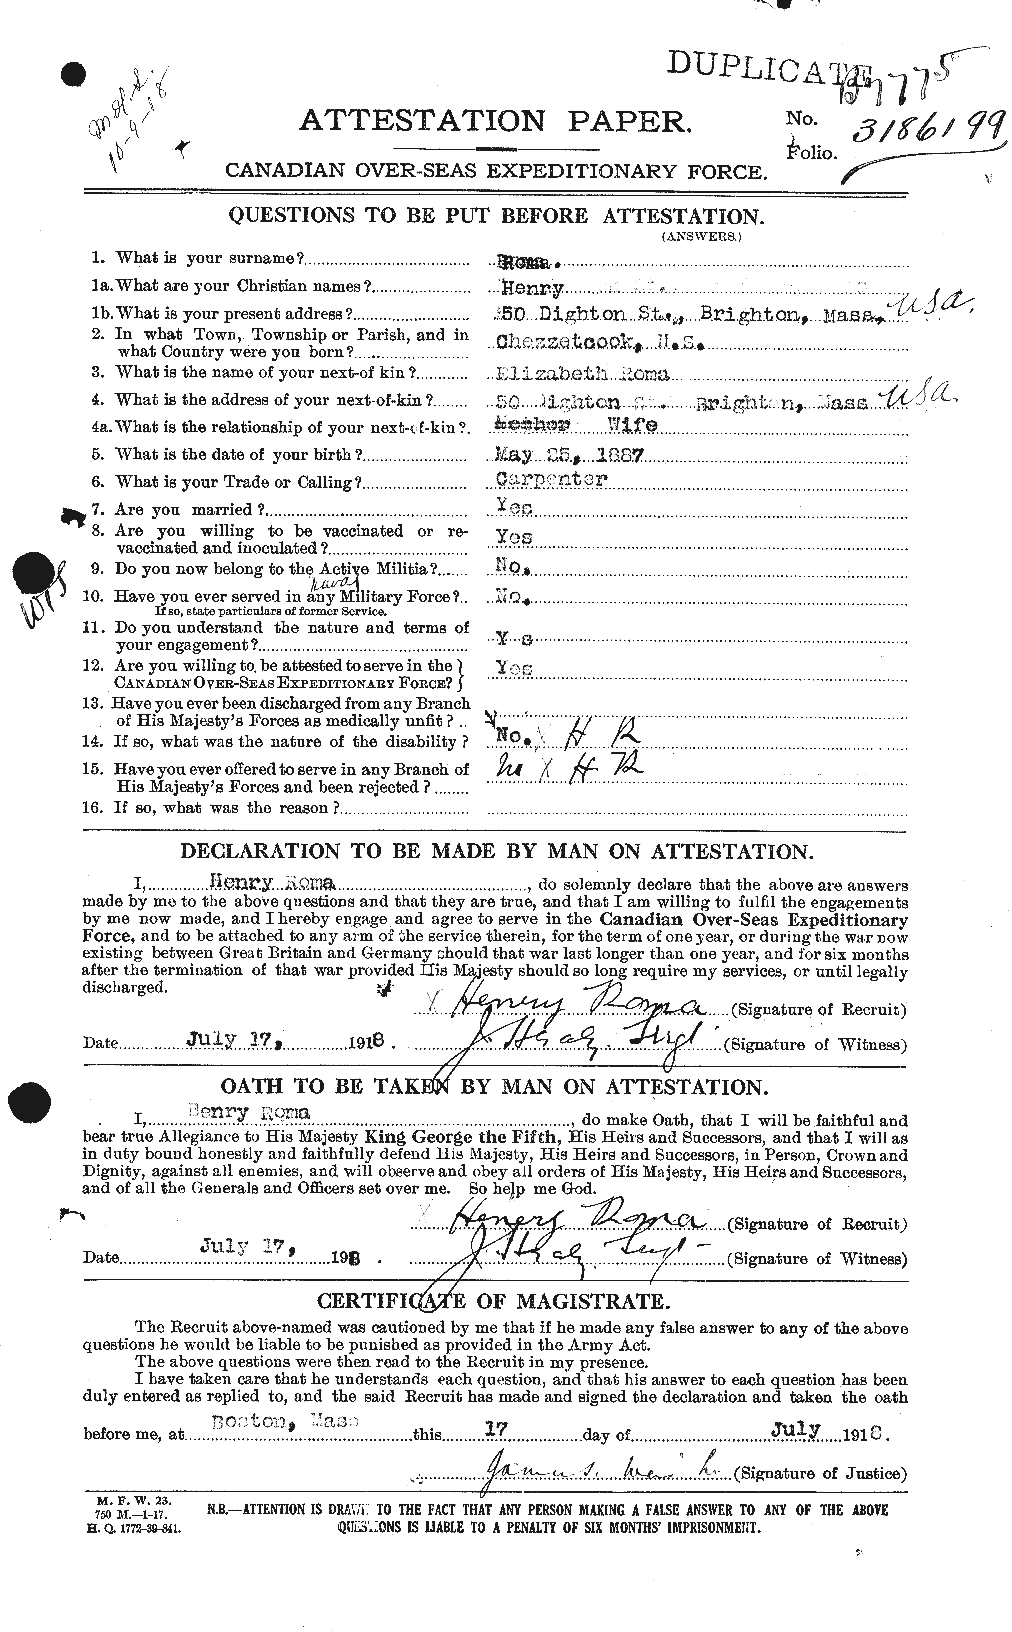 Personnel Records of the First World War - CEF 613515a